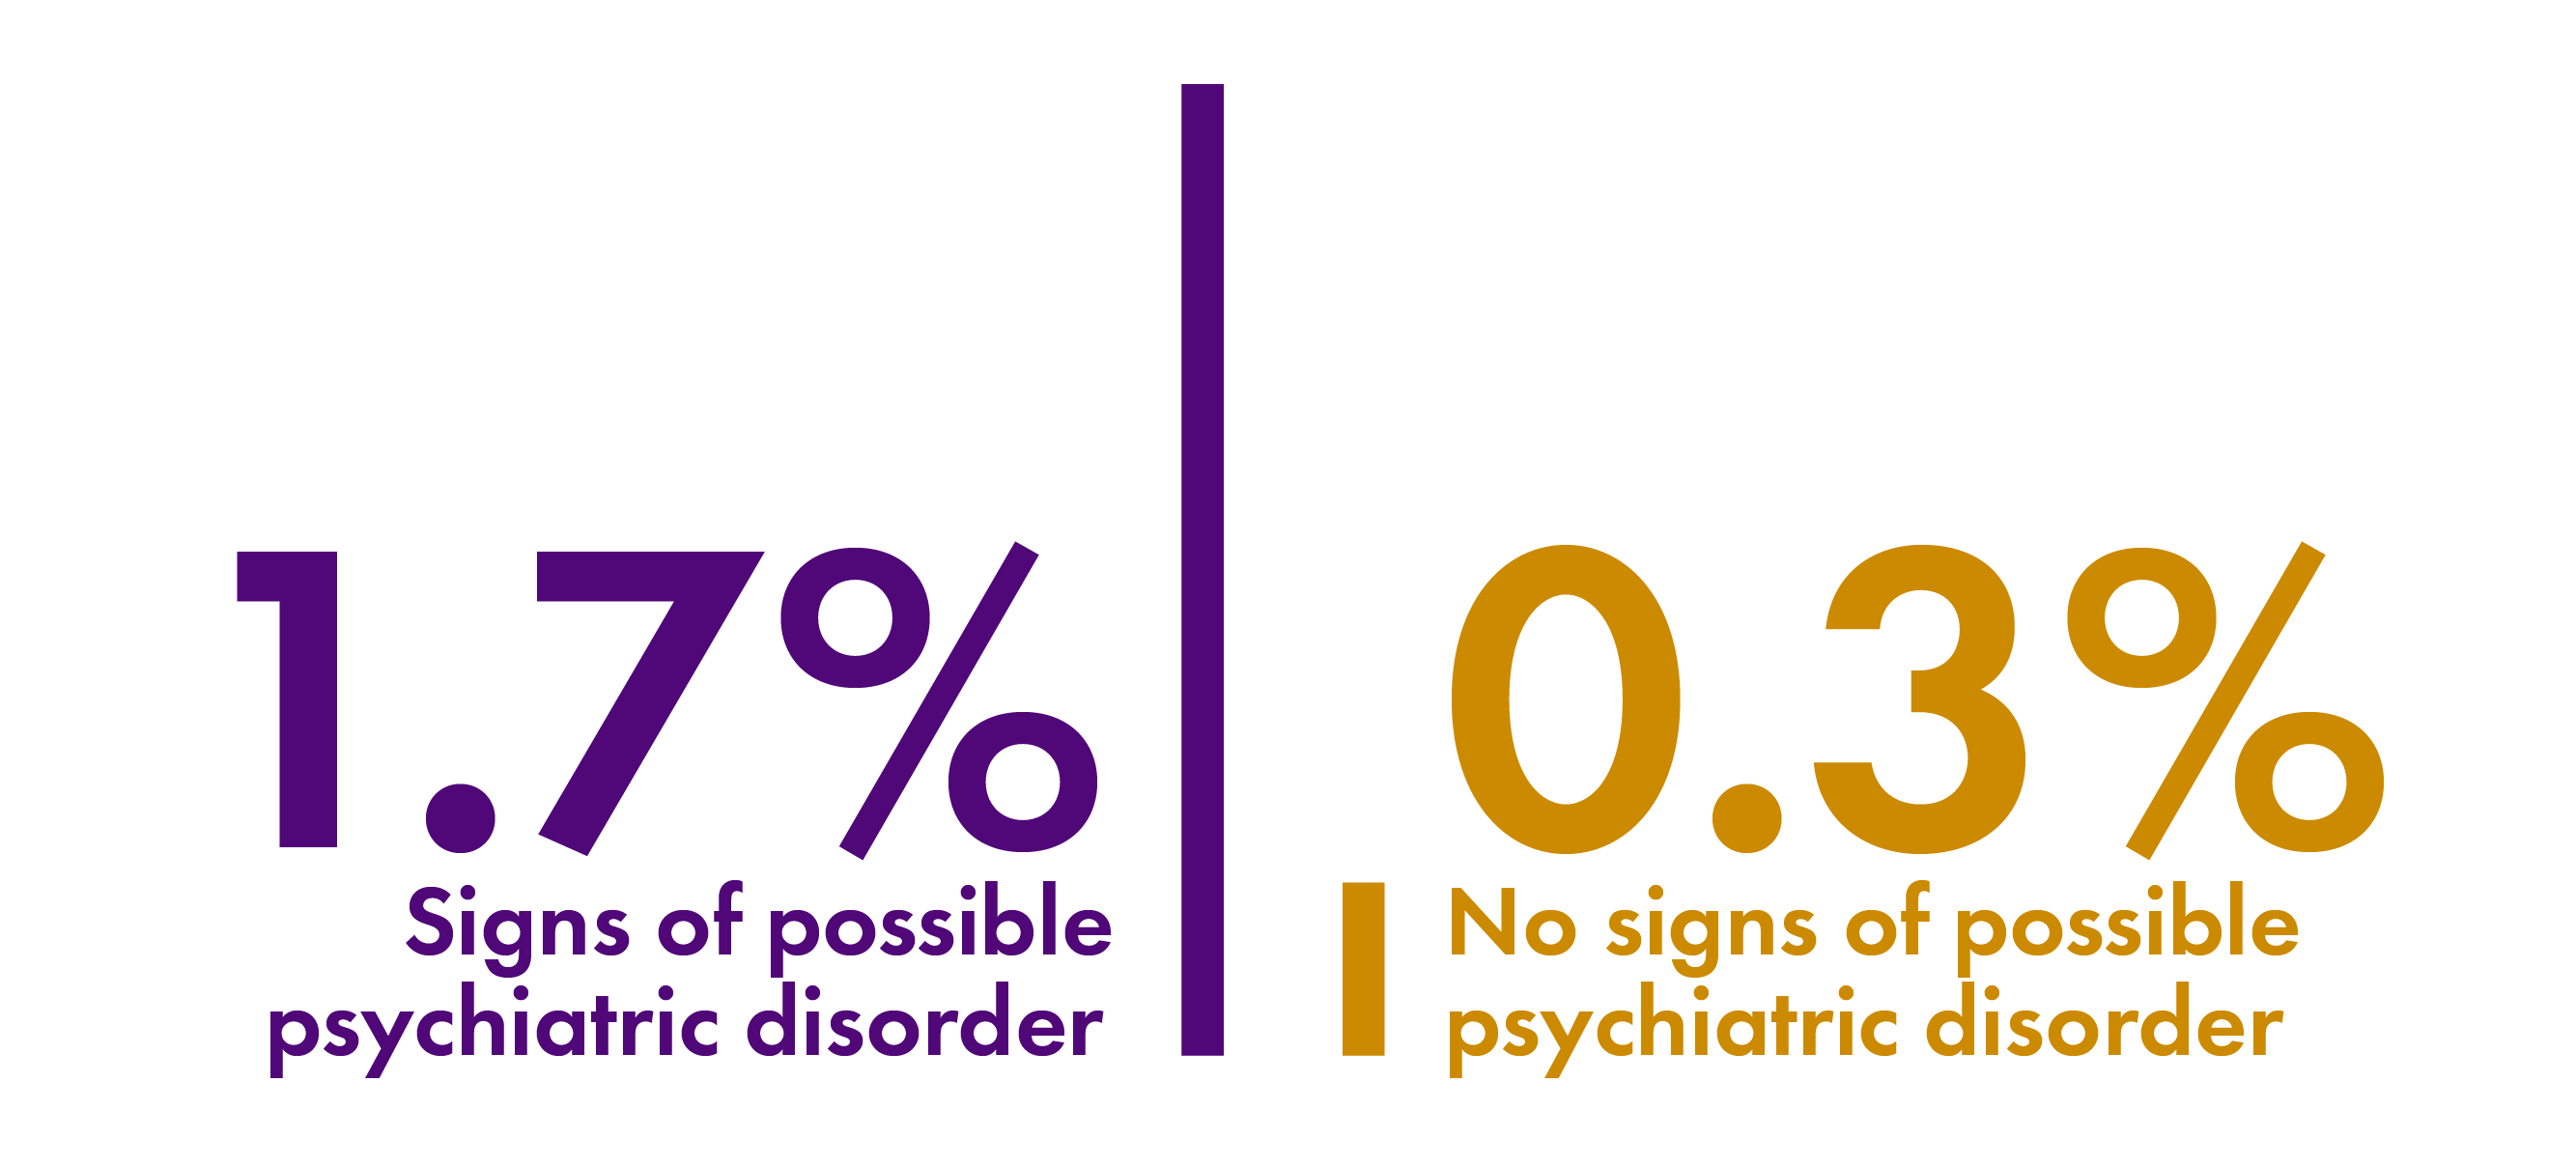 Bar chart showing that 1.7% of people with signs of a possible psychiatric disorder were people with a gambling problem. 0.3% of people without any signs of a possible psychiatric disorder were people with a gambling problem.